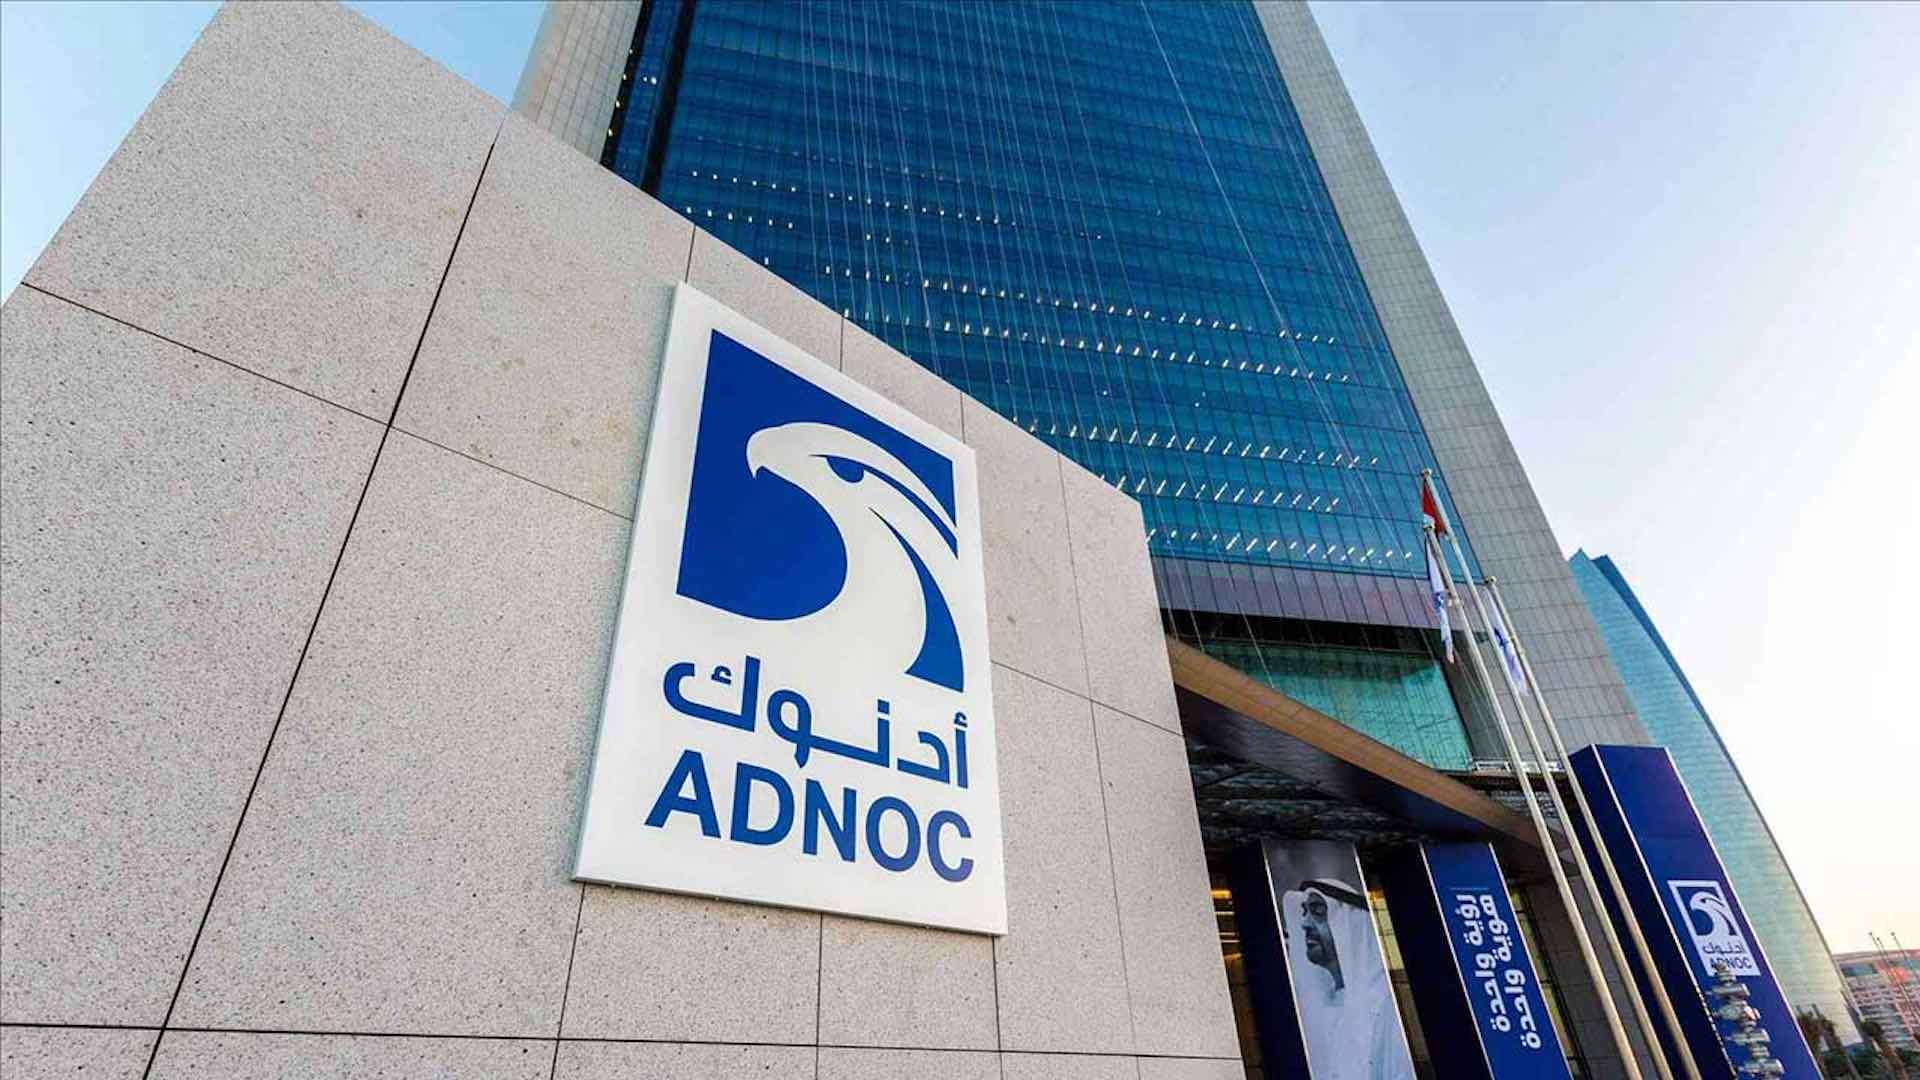 ADNOC pledges $15 billion for clean energy, new energies and decarbonization